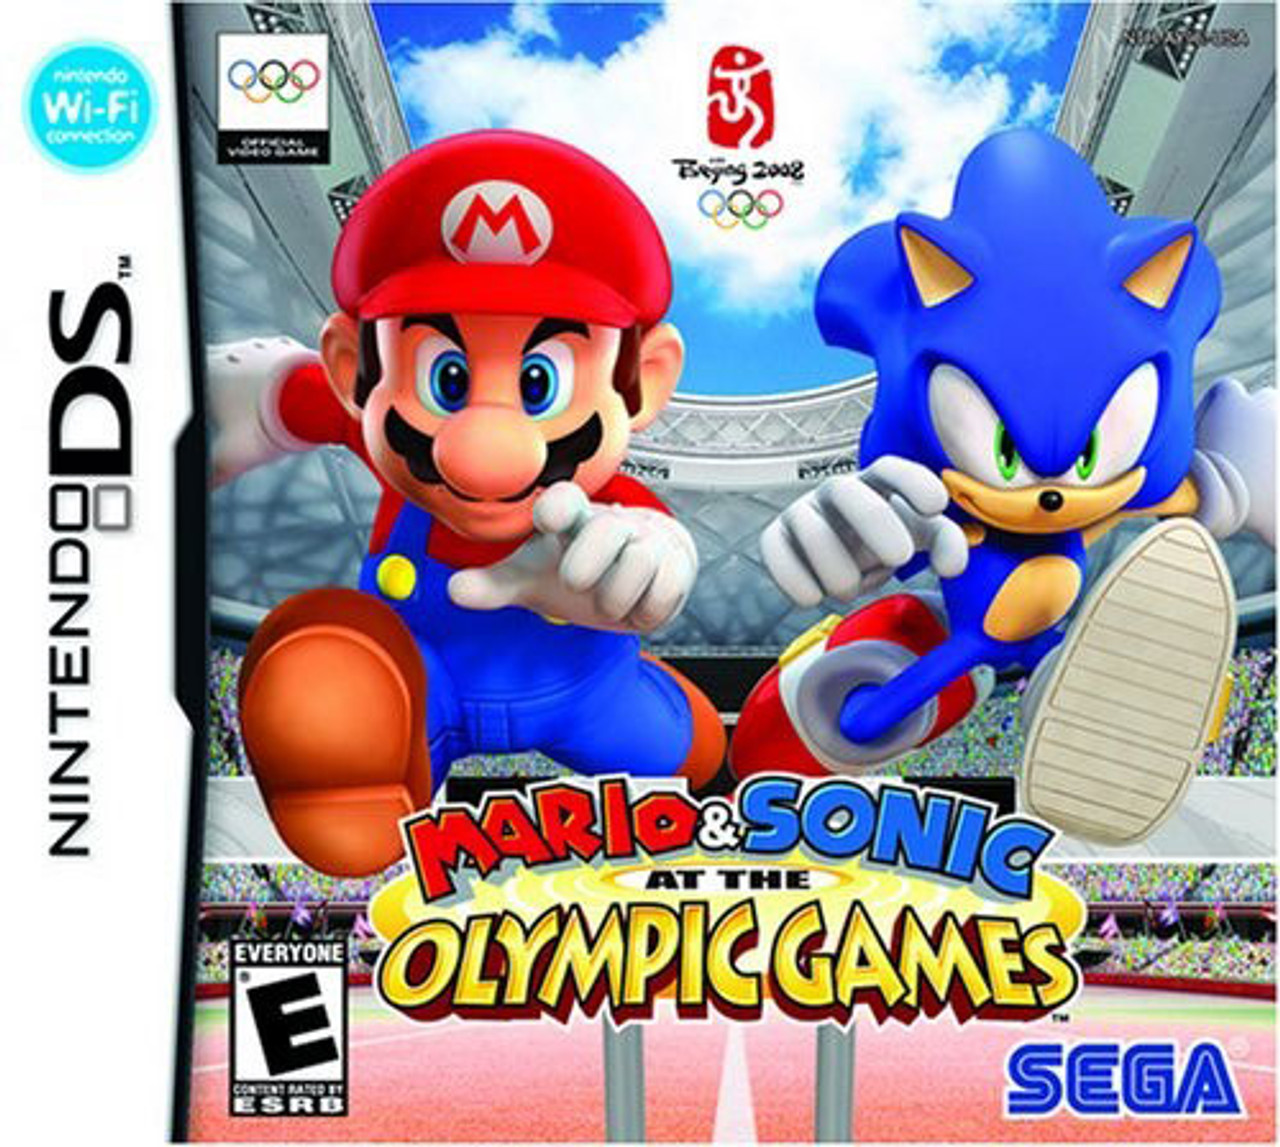 Mario & Sonic at the Olympic Games Nintendo DS Game For Sale